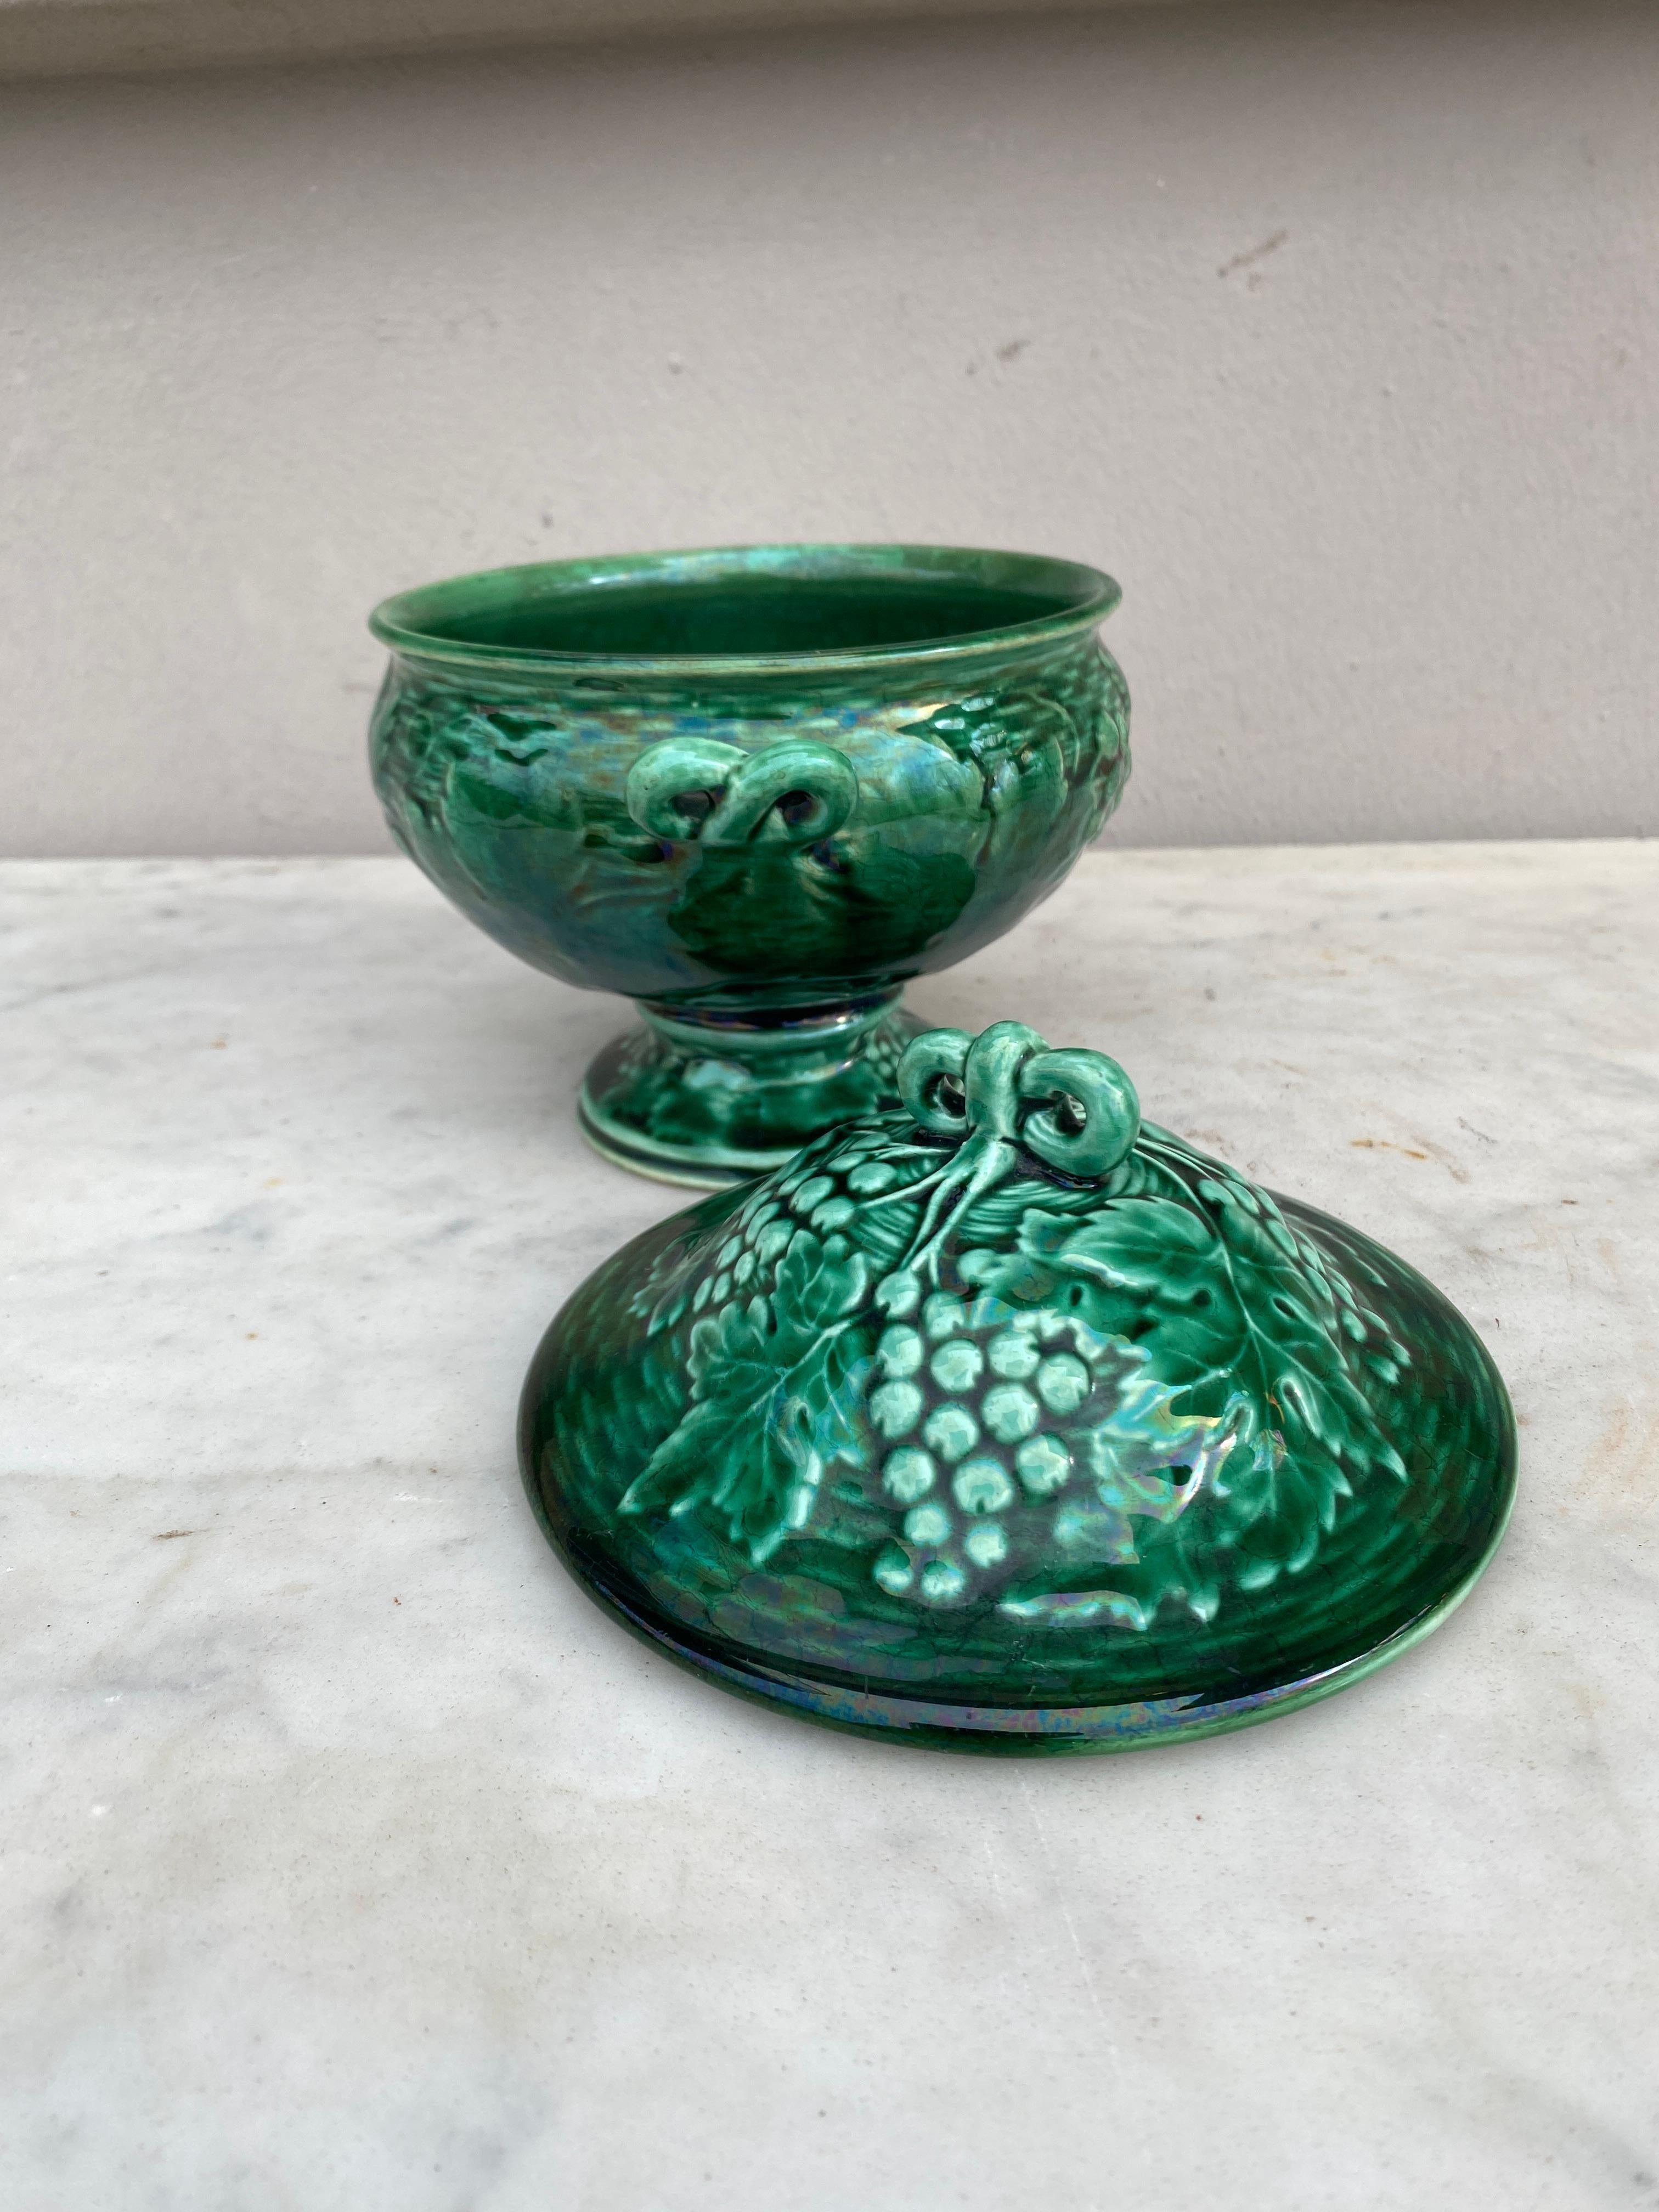 Rustic French Green Majolica Tureen with Grapes, circa 1890 For Sale